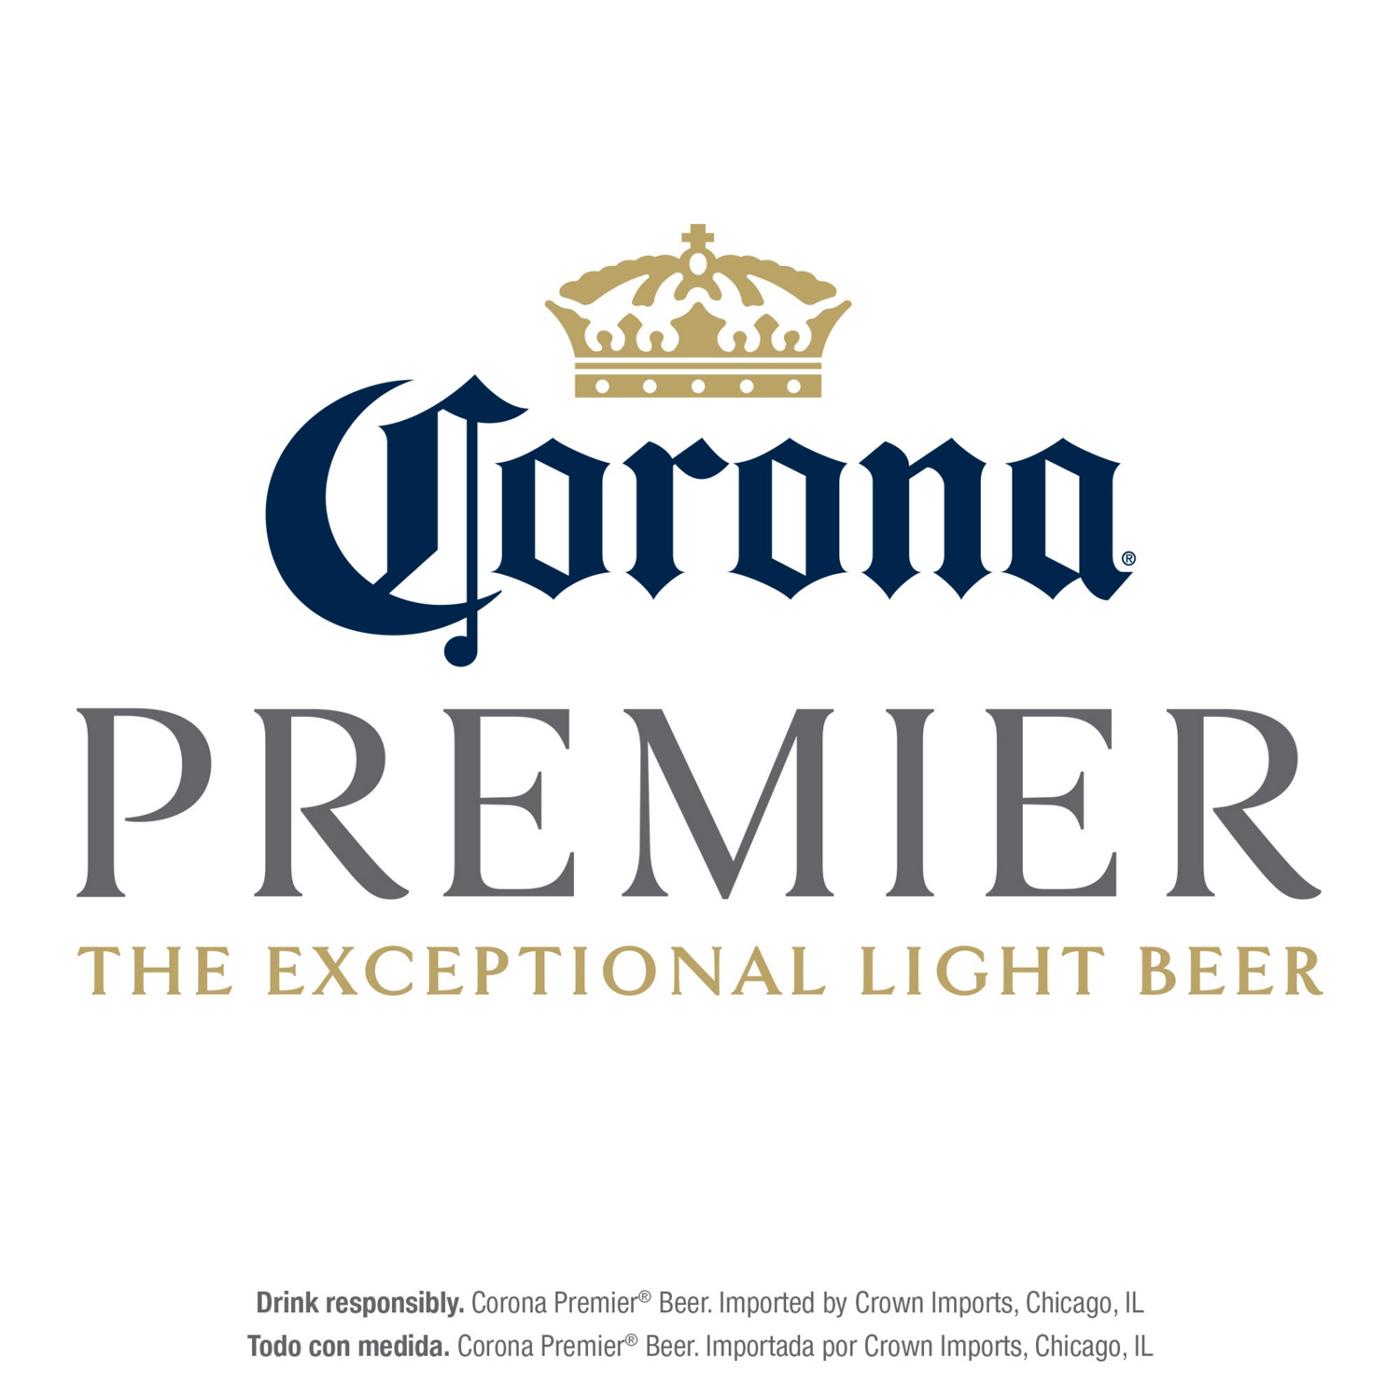 Corona Premier Mexican Lager Import Light Beer 12 oz Cans, 24 pk; image 8 of 10